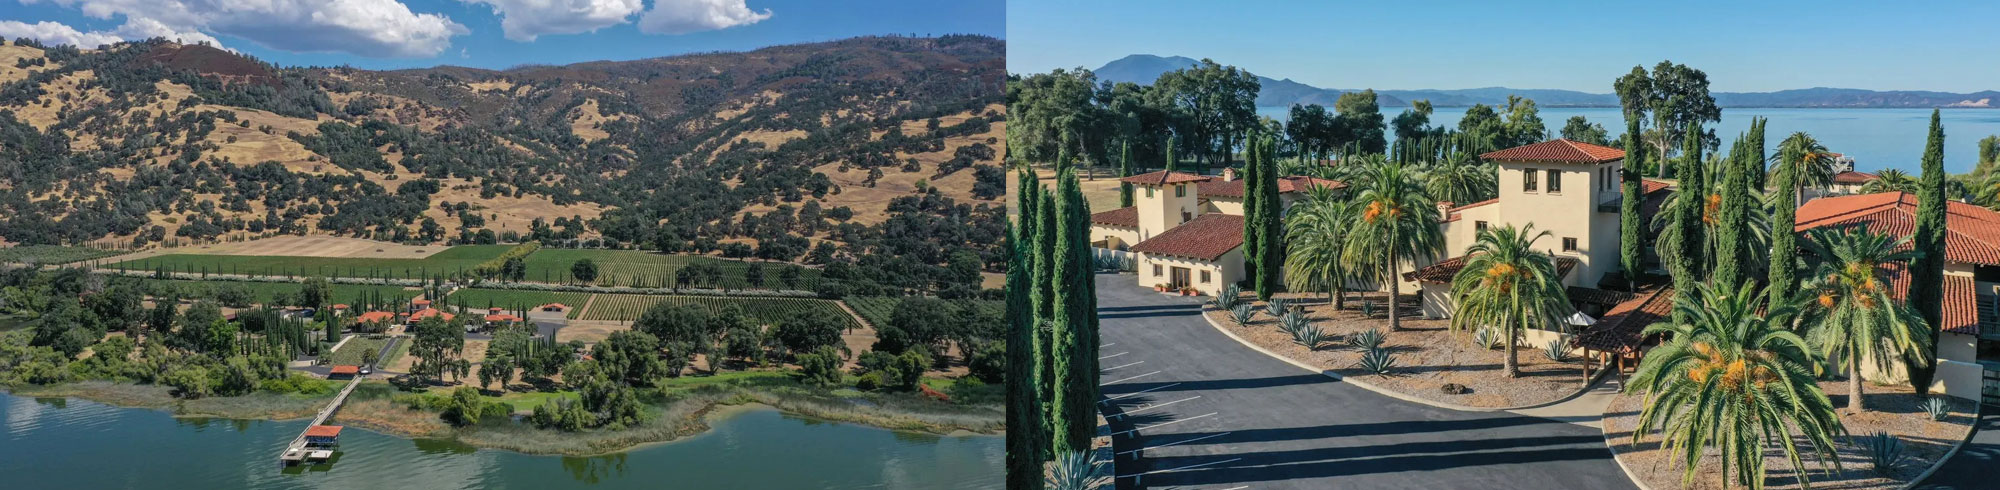 California Vineyard for Sale with Luxury Lakeside Wine Estate